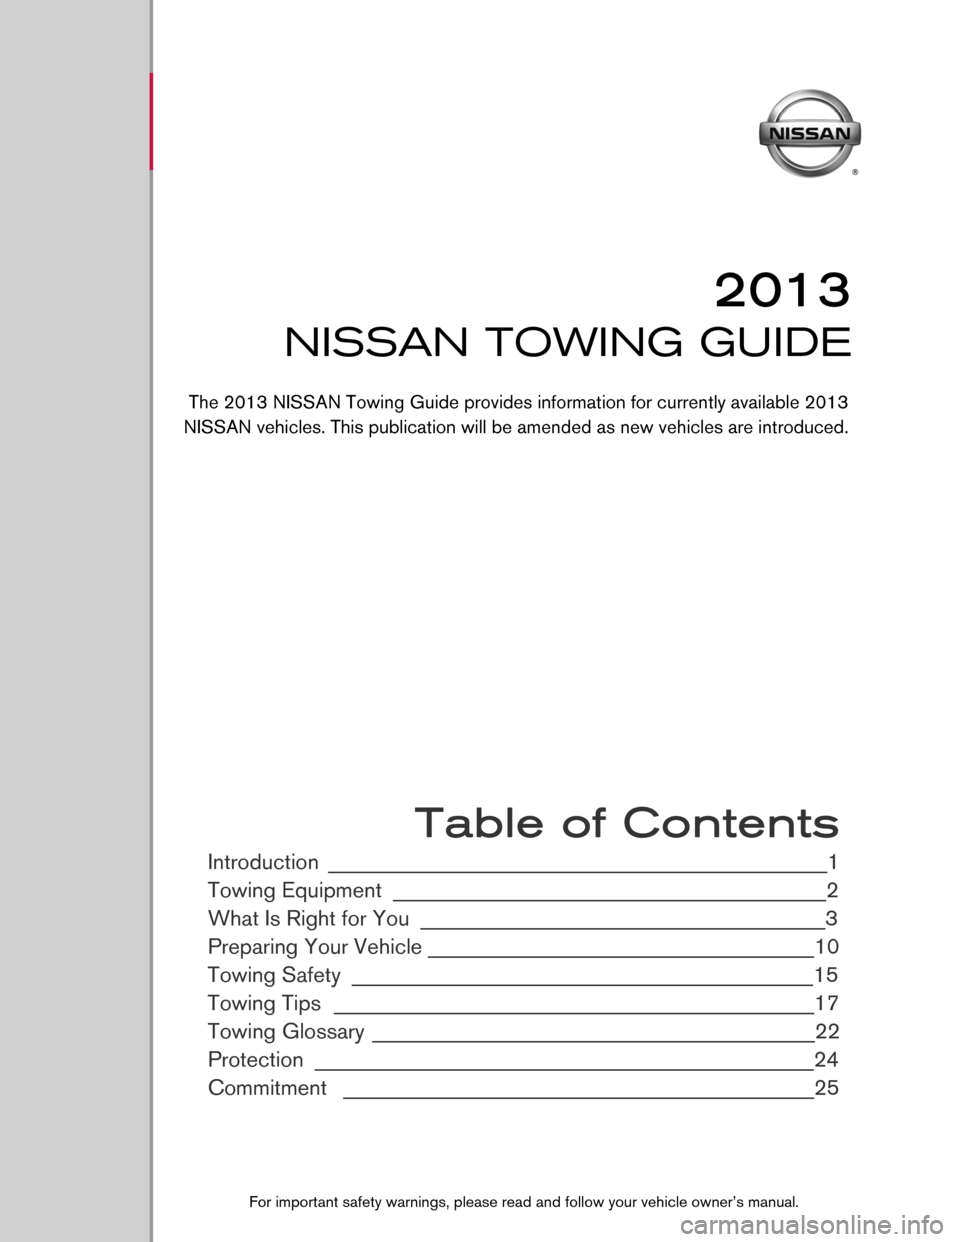 NISSAN 370Z COUPE 2013 Z34 Towing Guide 9
2013
NISSAN TOWING GUIDE
 Table of Contents
Introduction _____________________________________________________1 
Towing Equipment
 ______________________________________________2 
What Is Right for 